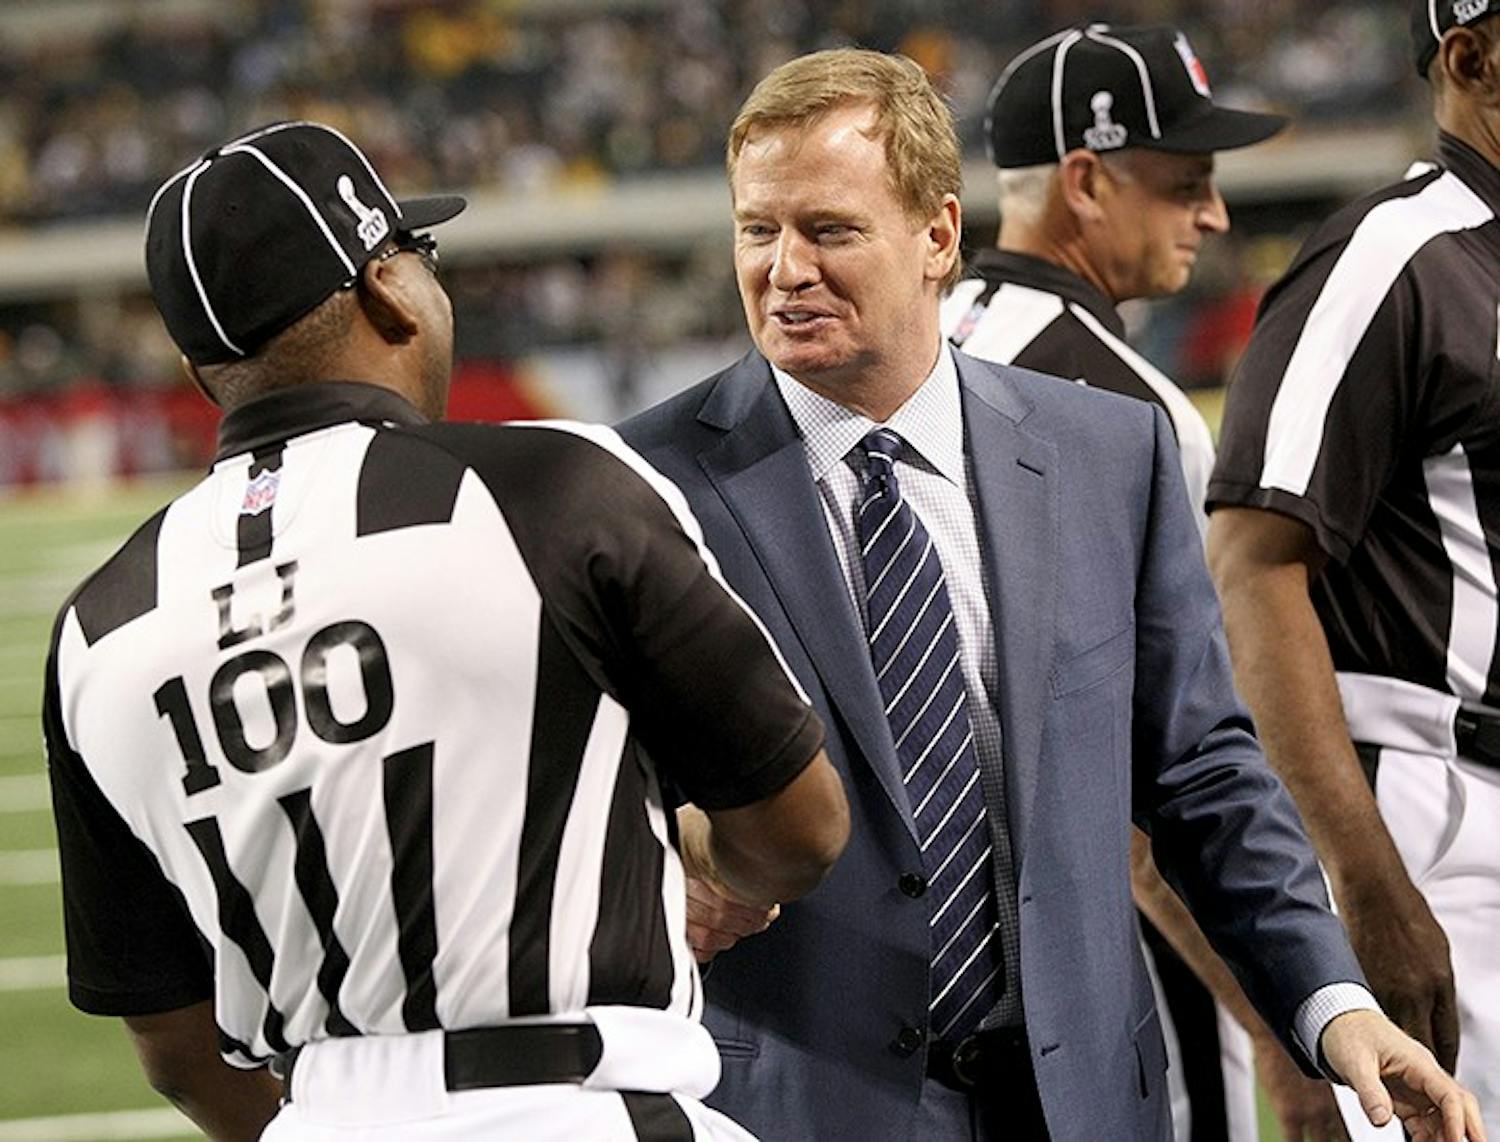 Commissioner of the National Football League, Roger S. Goodell, meets with line judge Tom Symonette (100) before the start of Super Bowl XLV where the Green Bay Packers face the Pittsburgh Steelers at Cowboys Stadium in Arlington, Texas, Sunday, February 6, 2011. (Ron Jenkins/Fort Worth Star-Telegram/MCT)